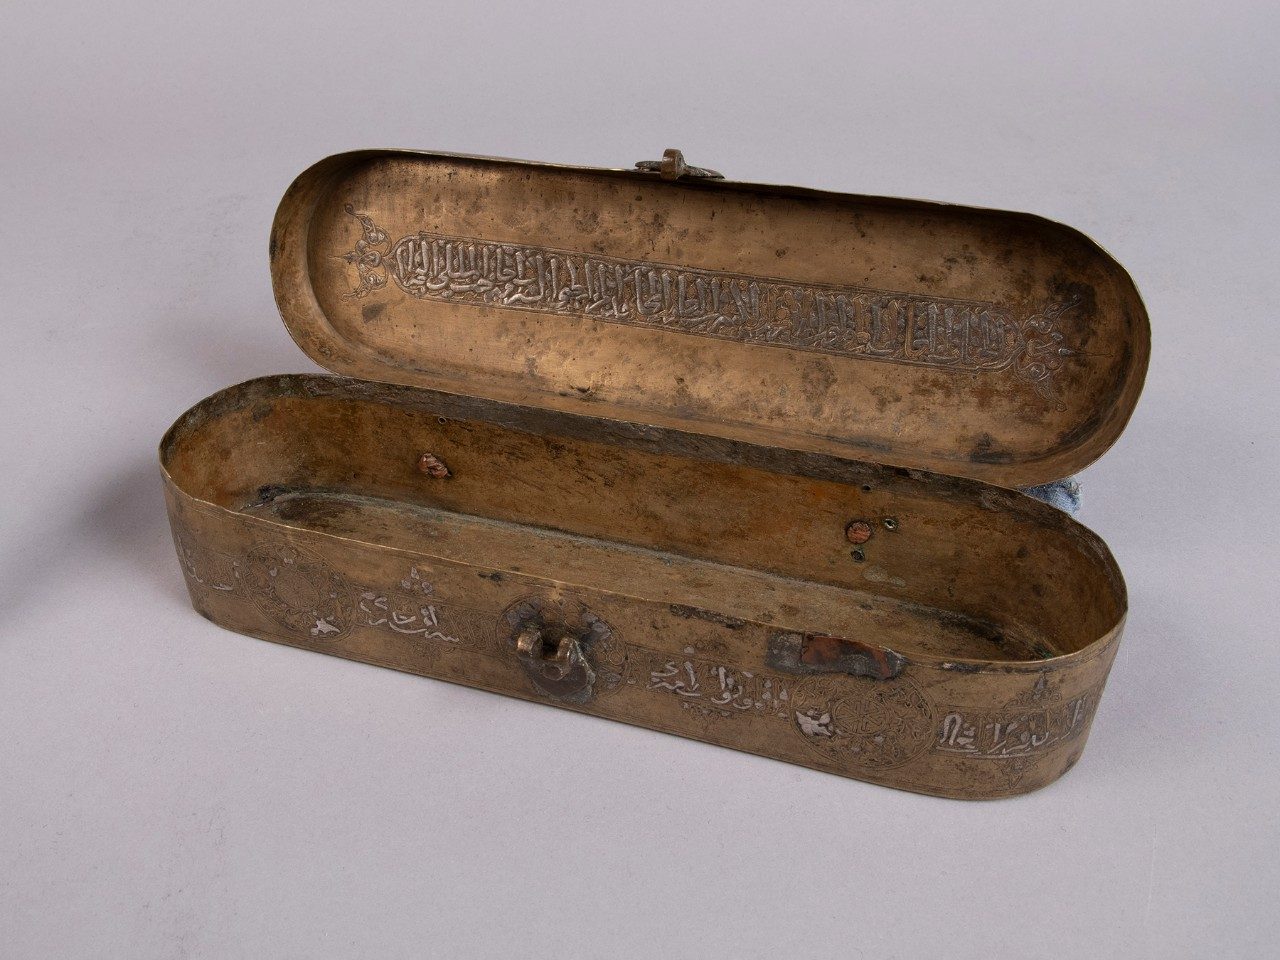 Oblong hinge-top brass box with a clasp on its front. Arabic inscriptions line the exterior of the case, and the open top reveals more writing.